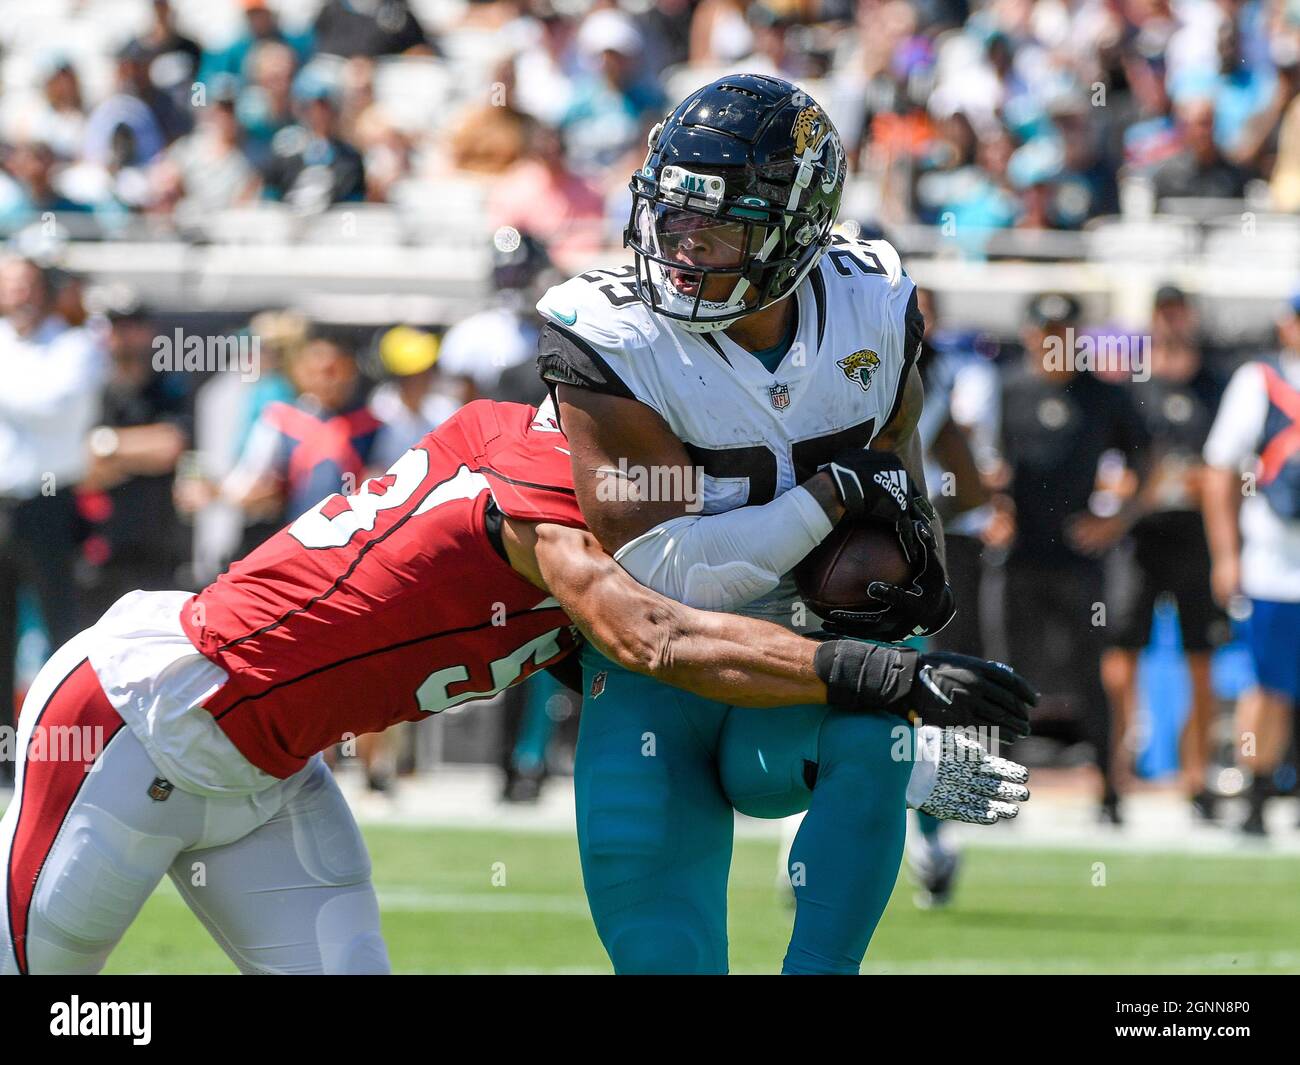 Jacksonville, FL, USA. 26th Sep, 2021. Jacksonville Jaguars safety Rayshawn  Jenkins (2) before 1st half NFL football game between the Arizona Cardinals  and the Jacksonville Jaguars at TIAA Bank Field in Jacksonville